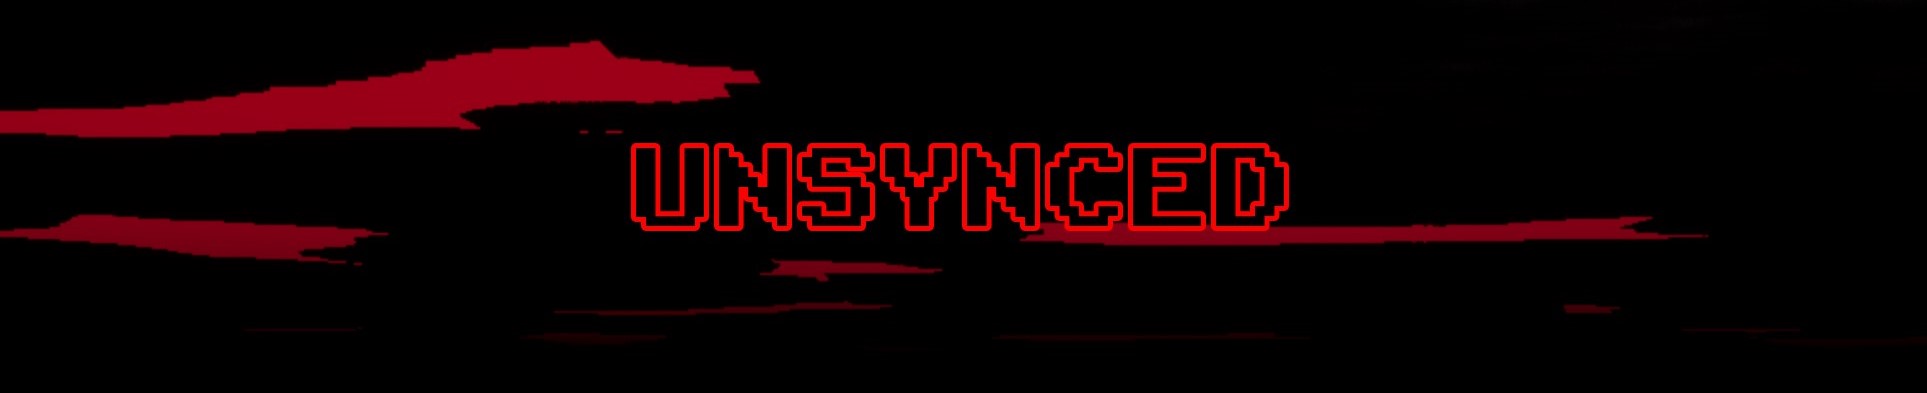 Unsynced - Retro FPS Game